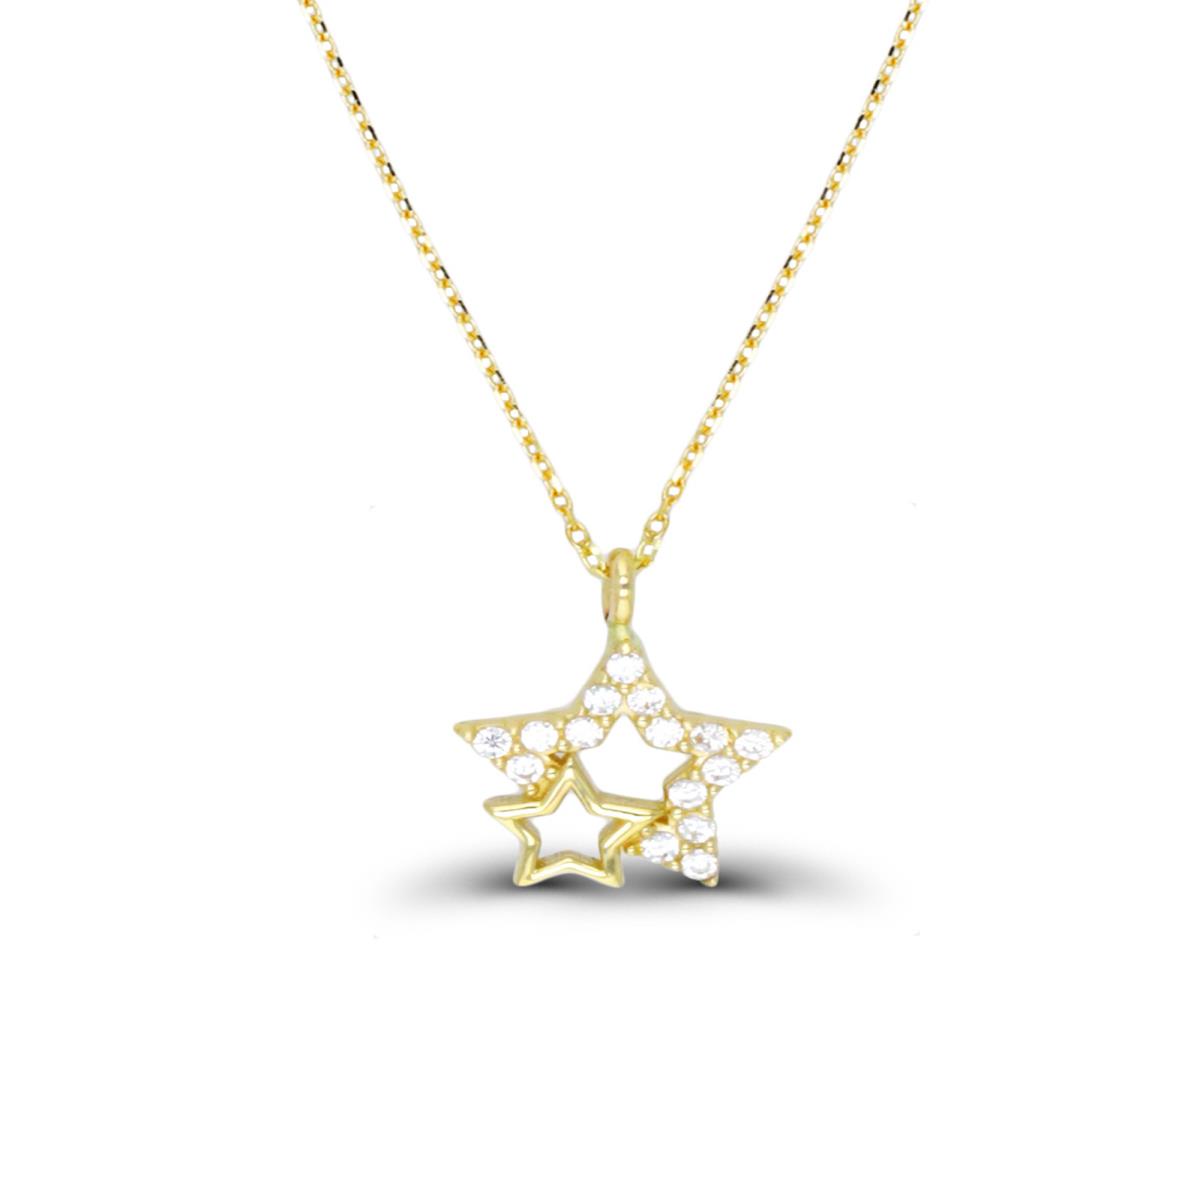 10K Yellow Gold Double Star 16"+2" Necklace